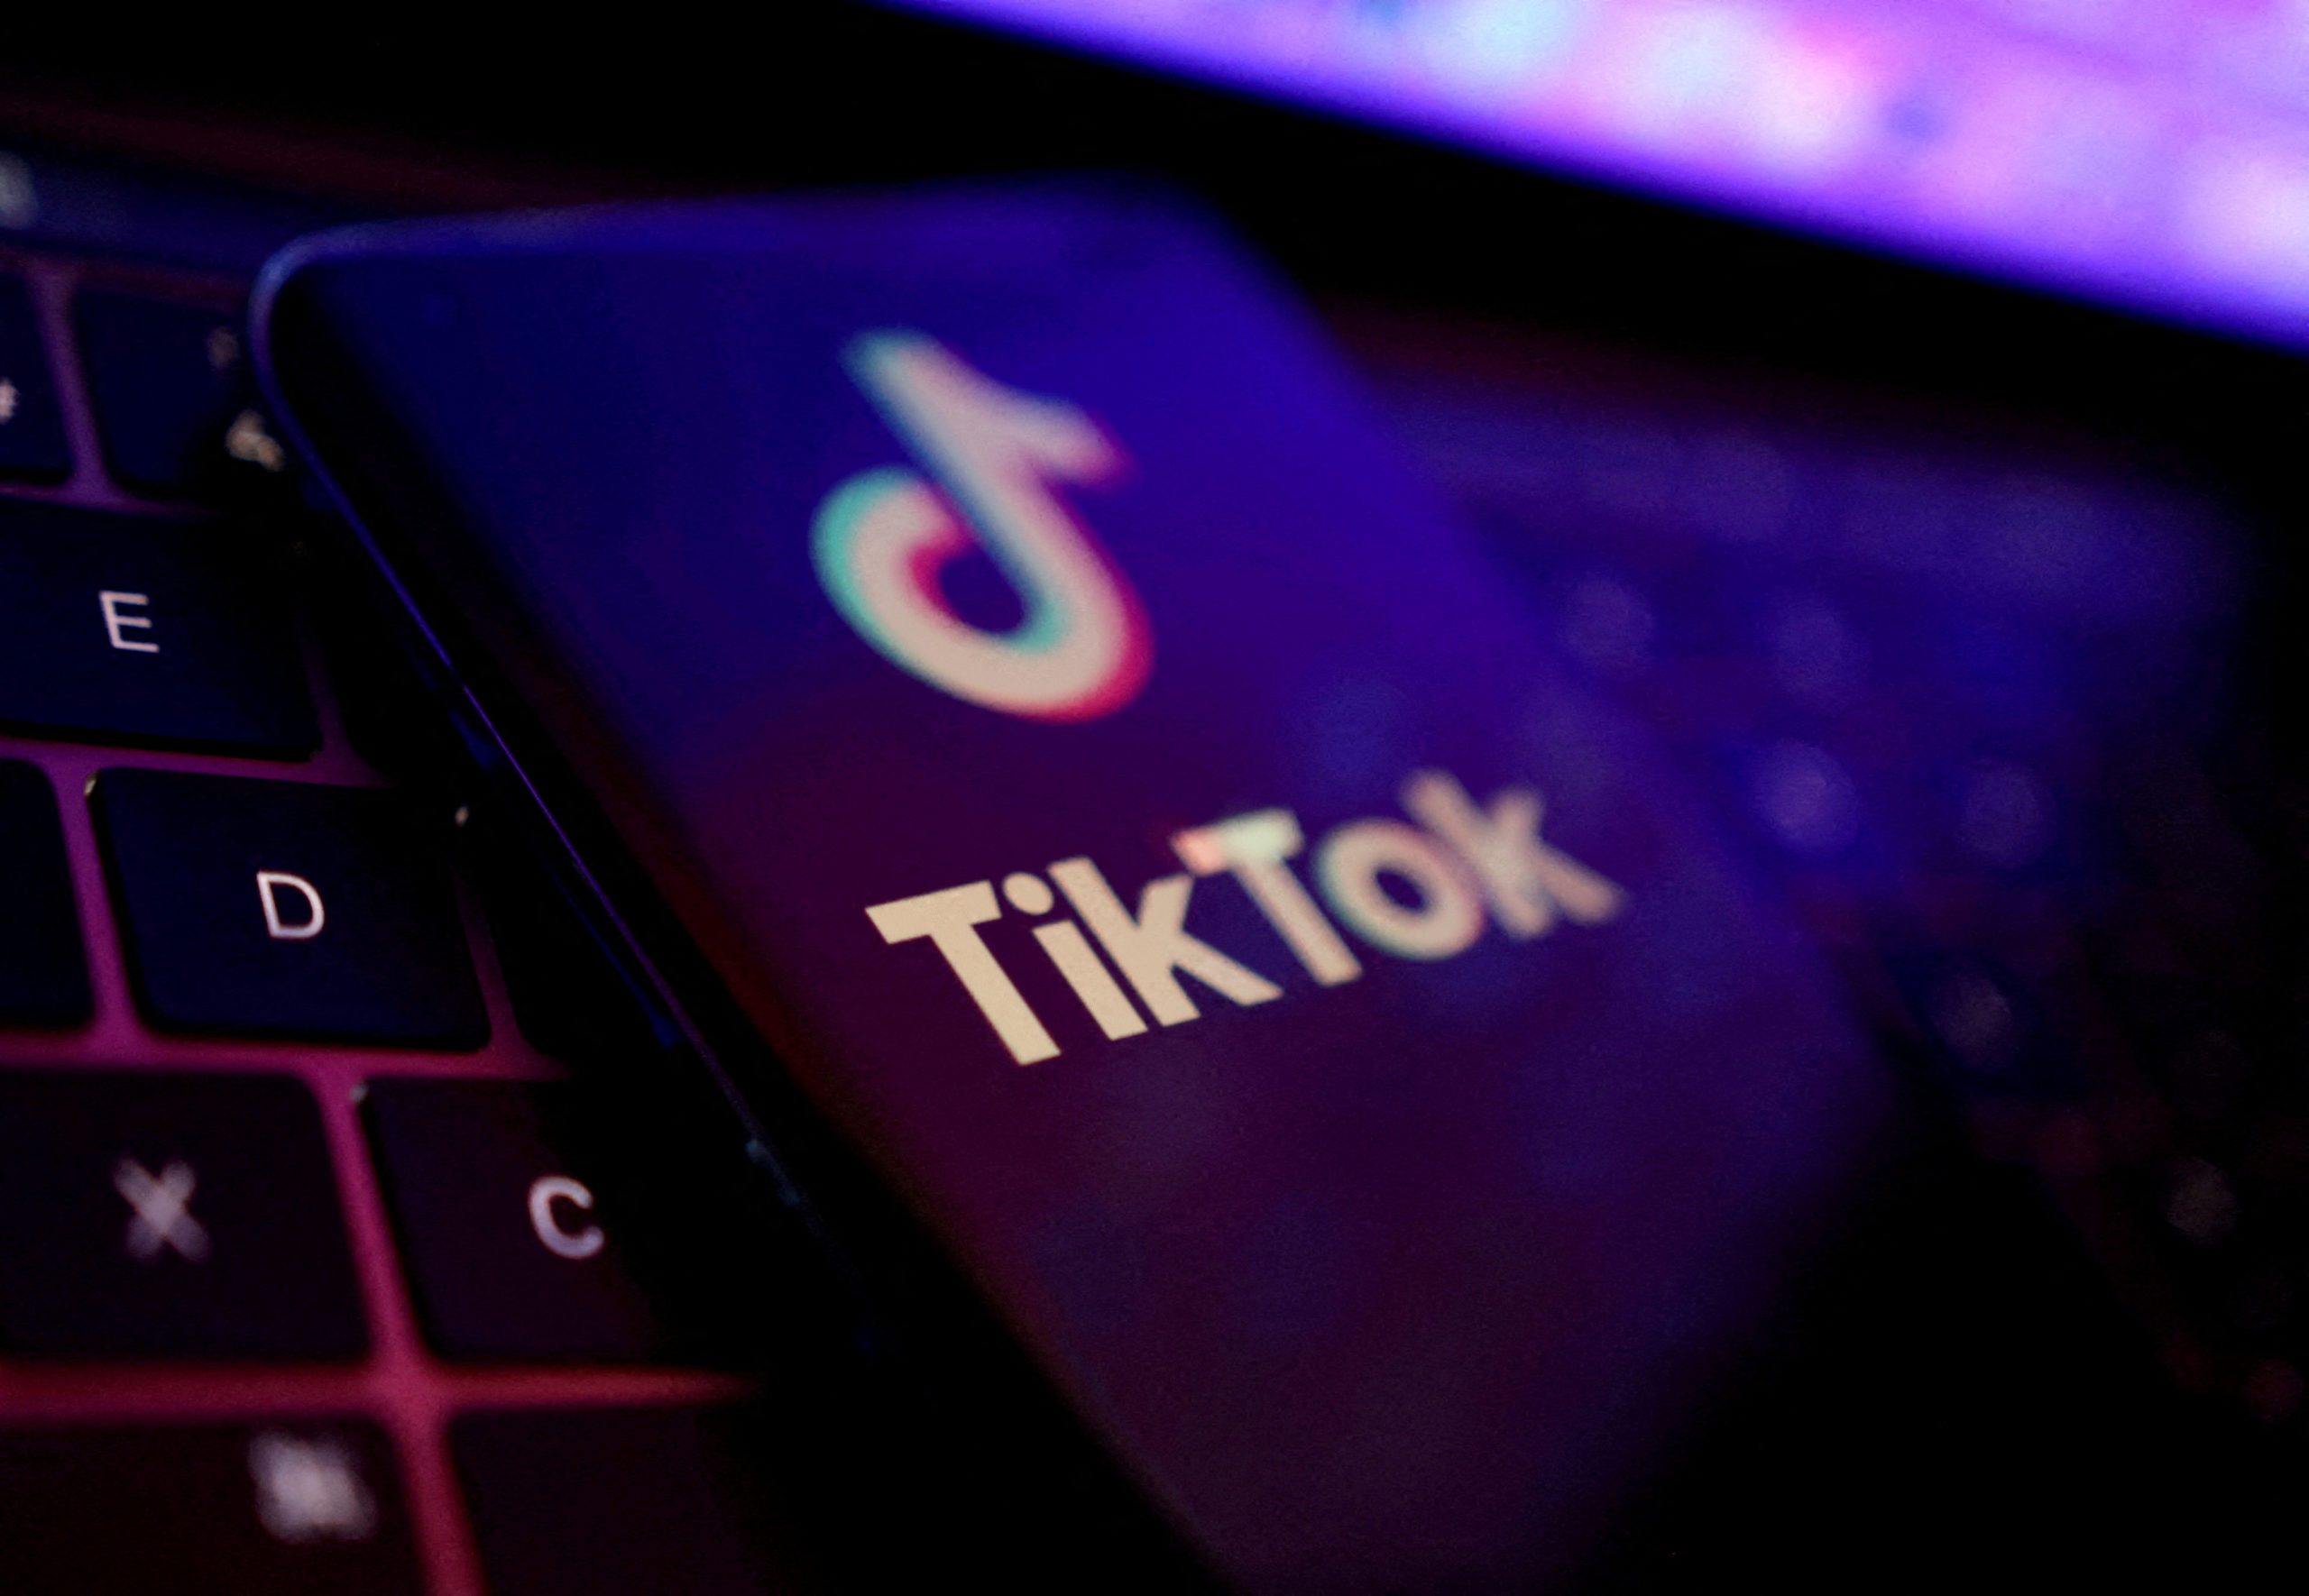 NZ to ban TikTok on parliament-linked devices due to security concerns